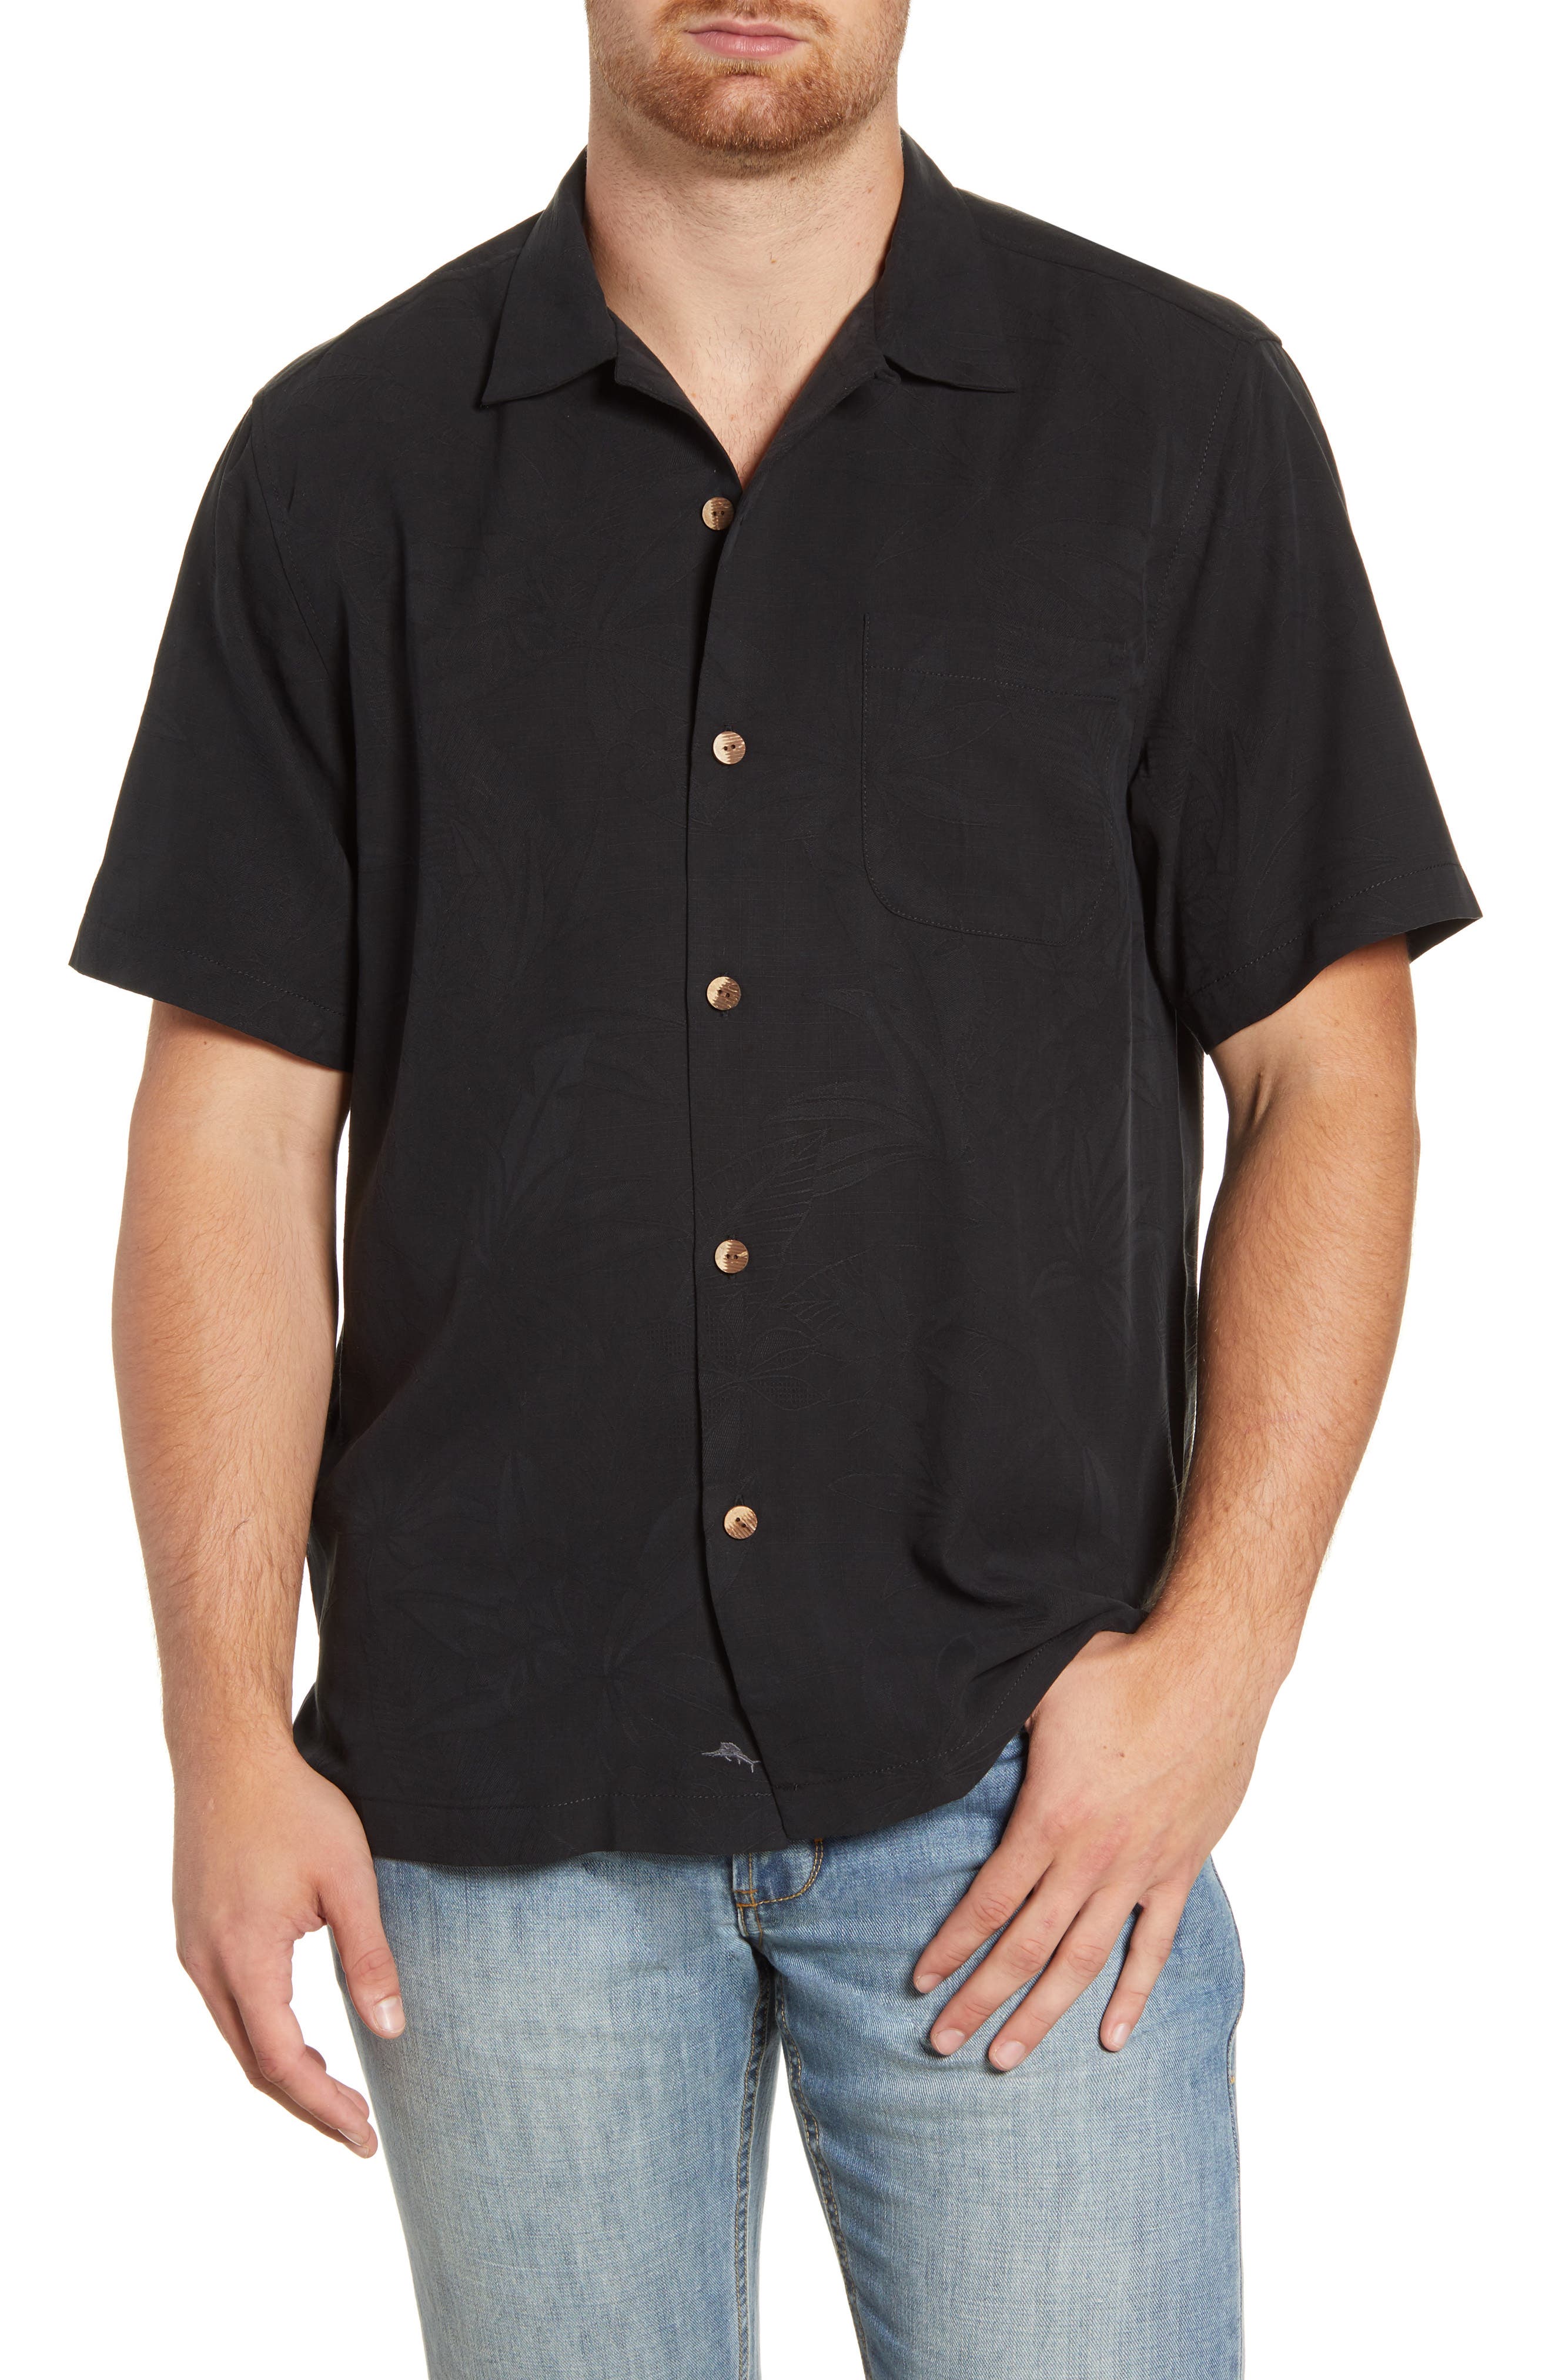 tommy bahama short sleeve button down